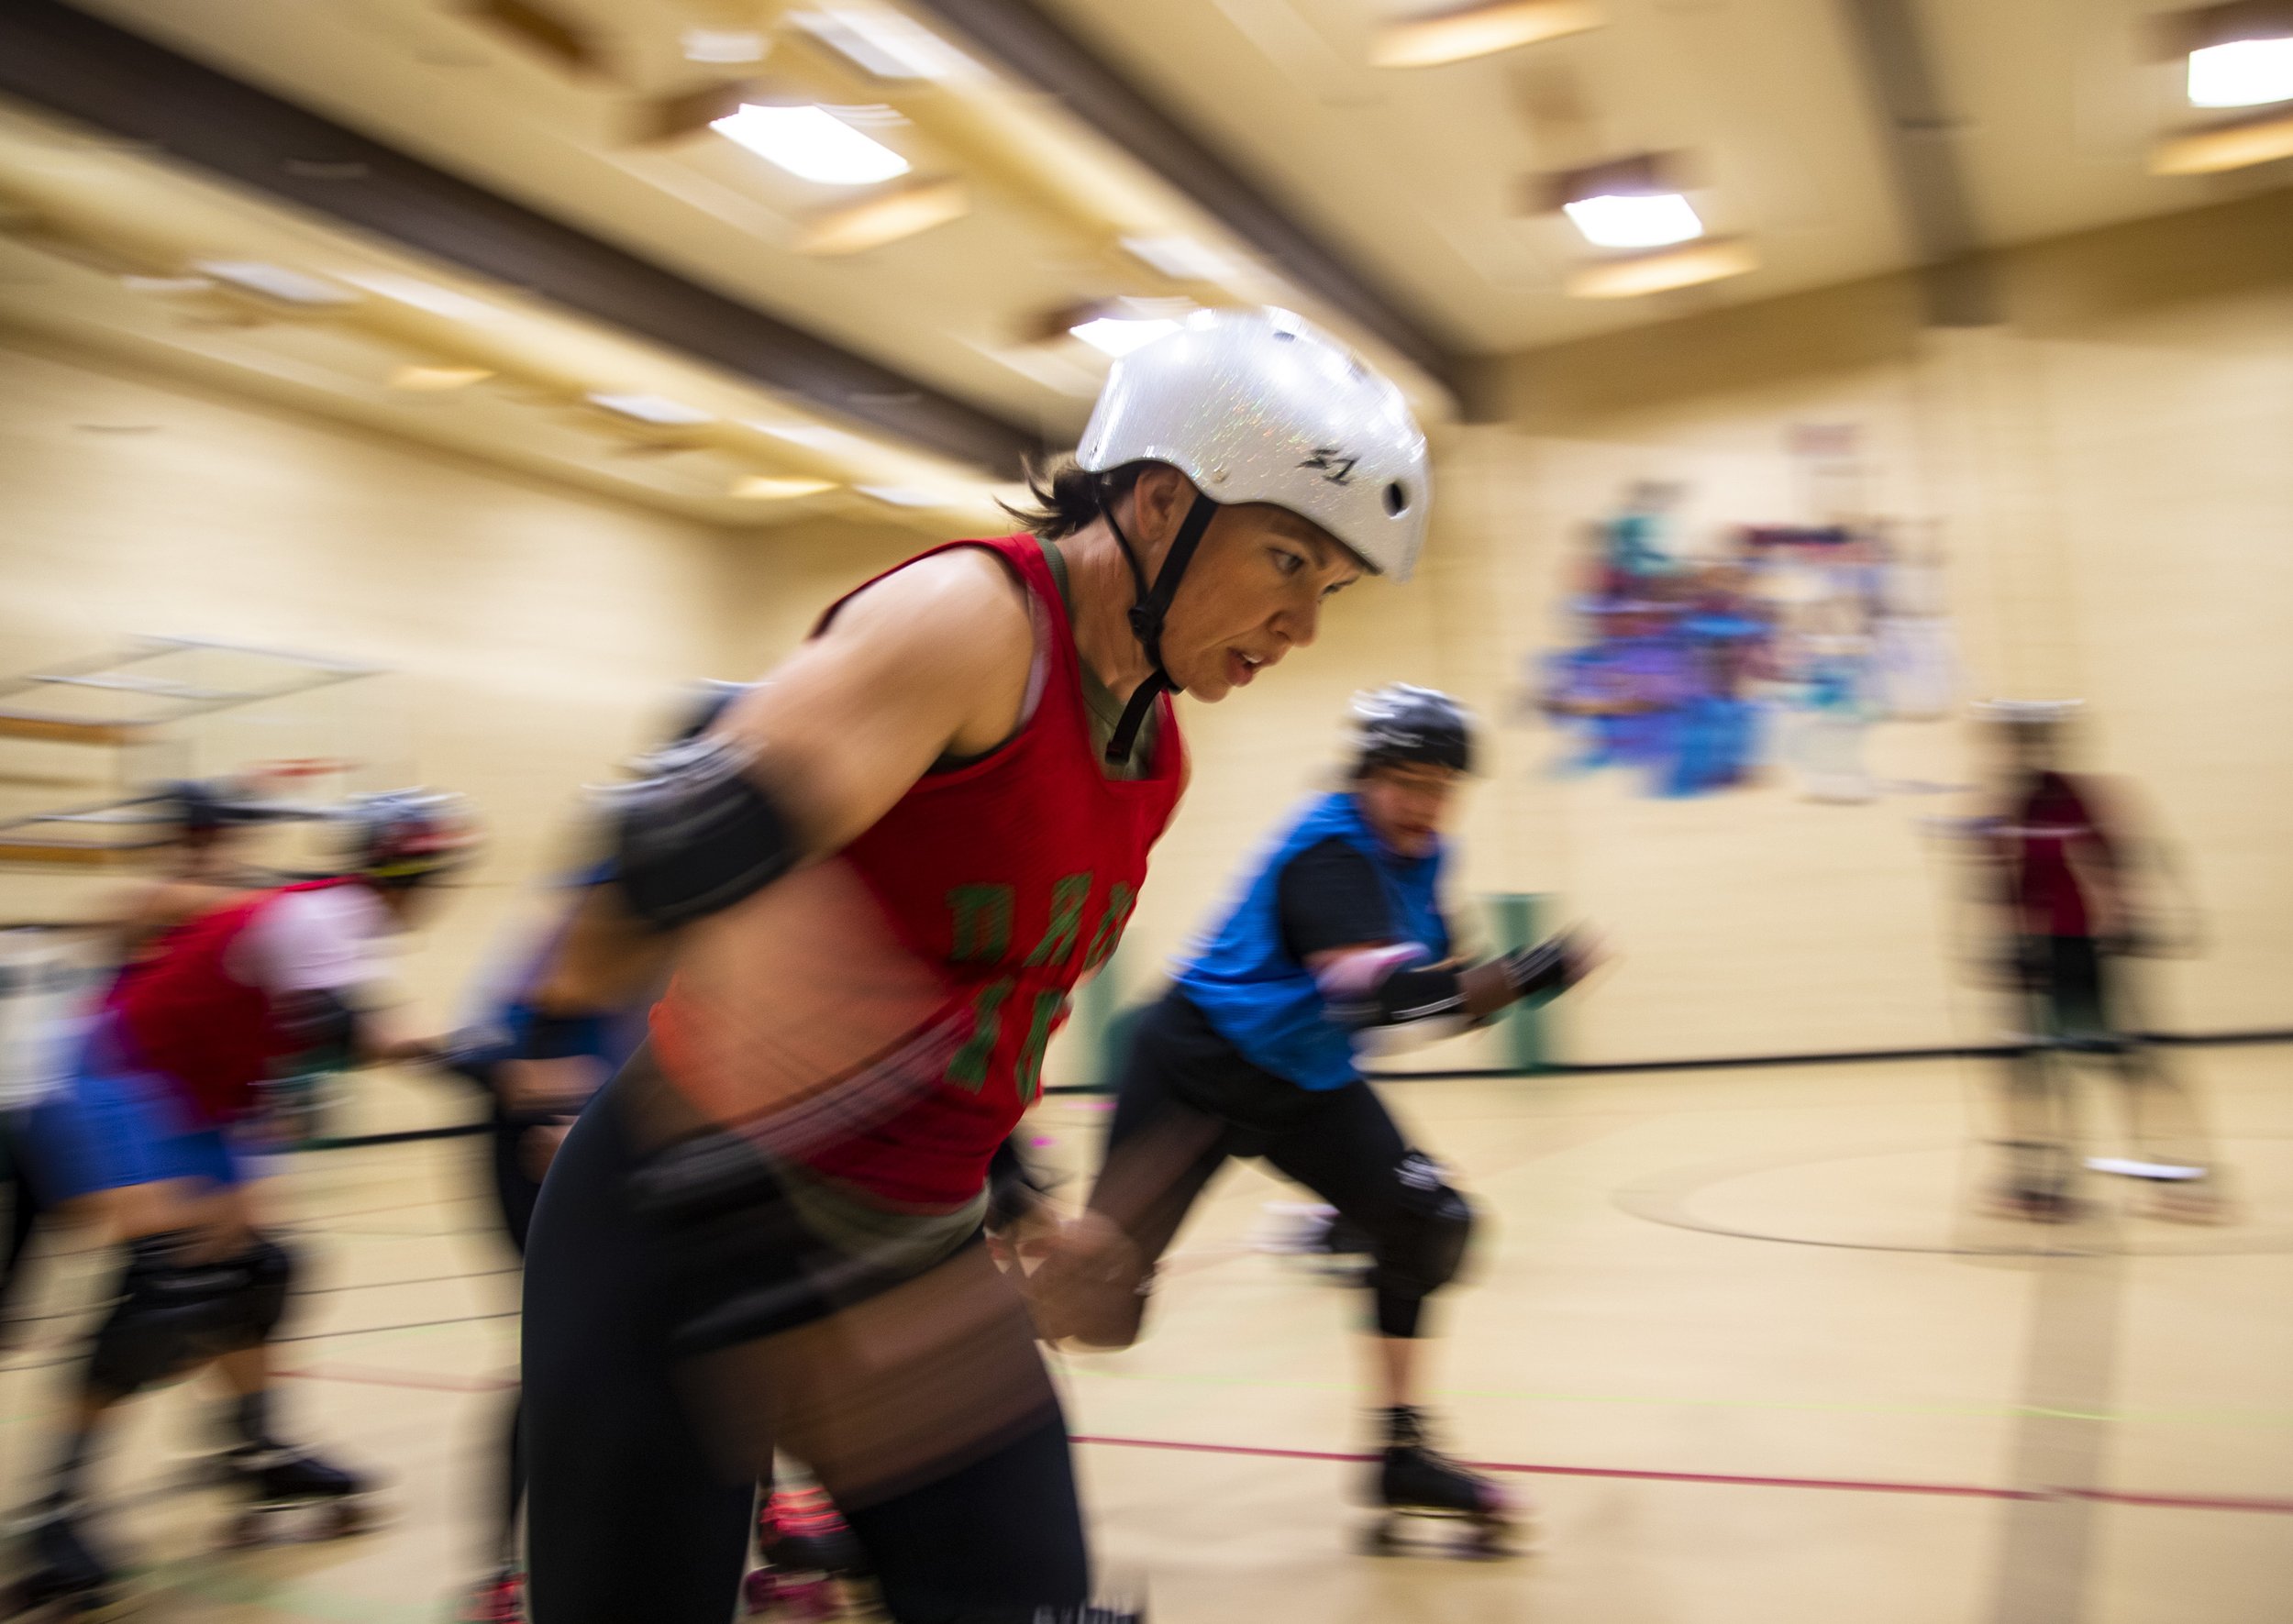  Ginny Borderick skates through blockers while on a jam at the James O. Jessie Desert Highland Unity Center in Palm Springs, Calif., Wednesday.  